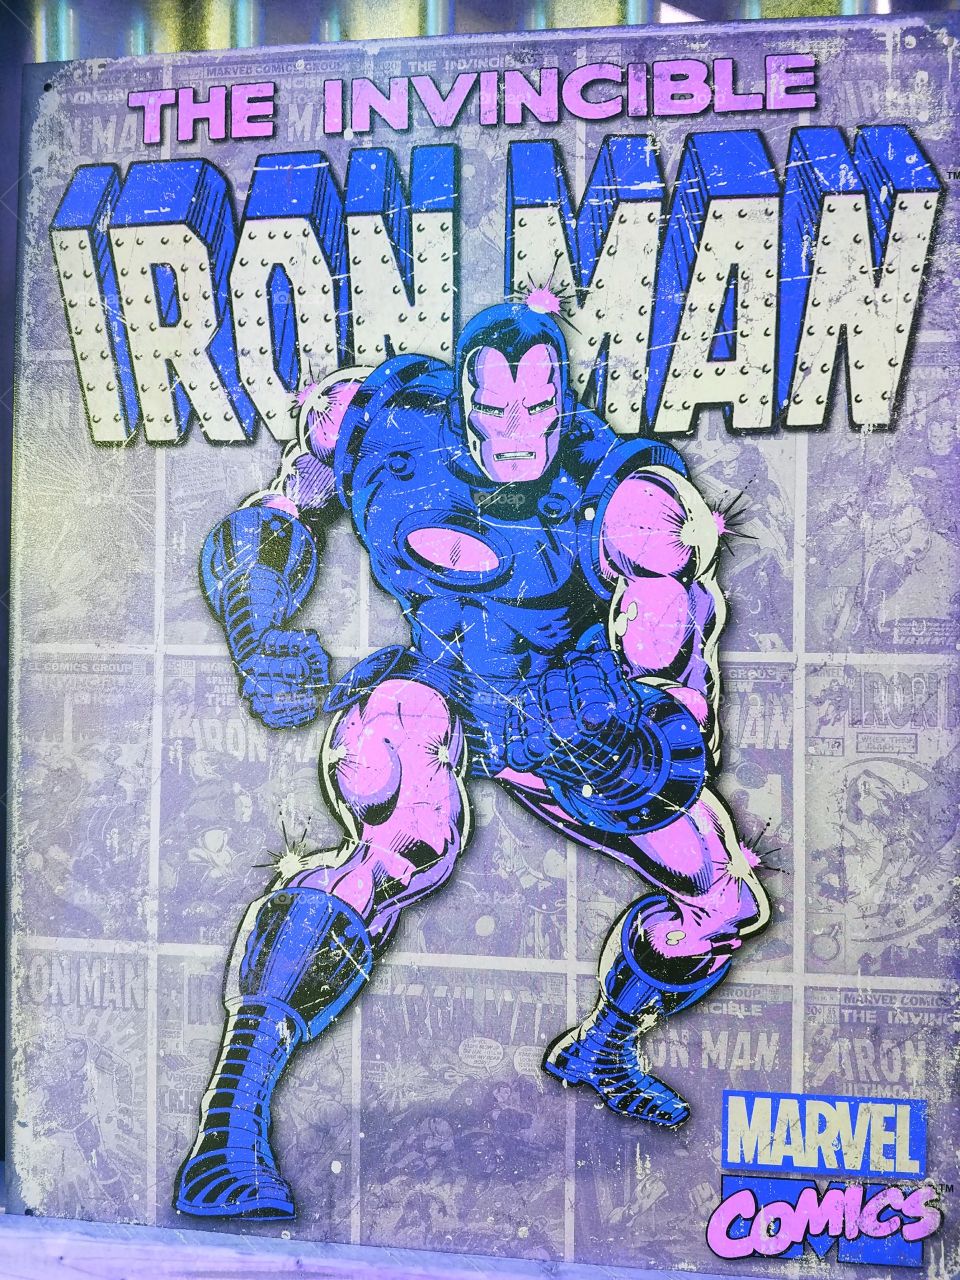 The Invincible Iron Man - Marvel Comics. Purple and Blue Poster.